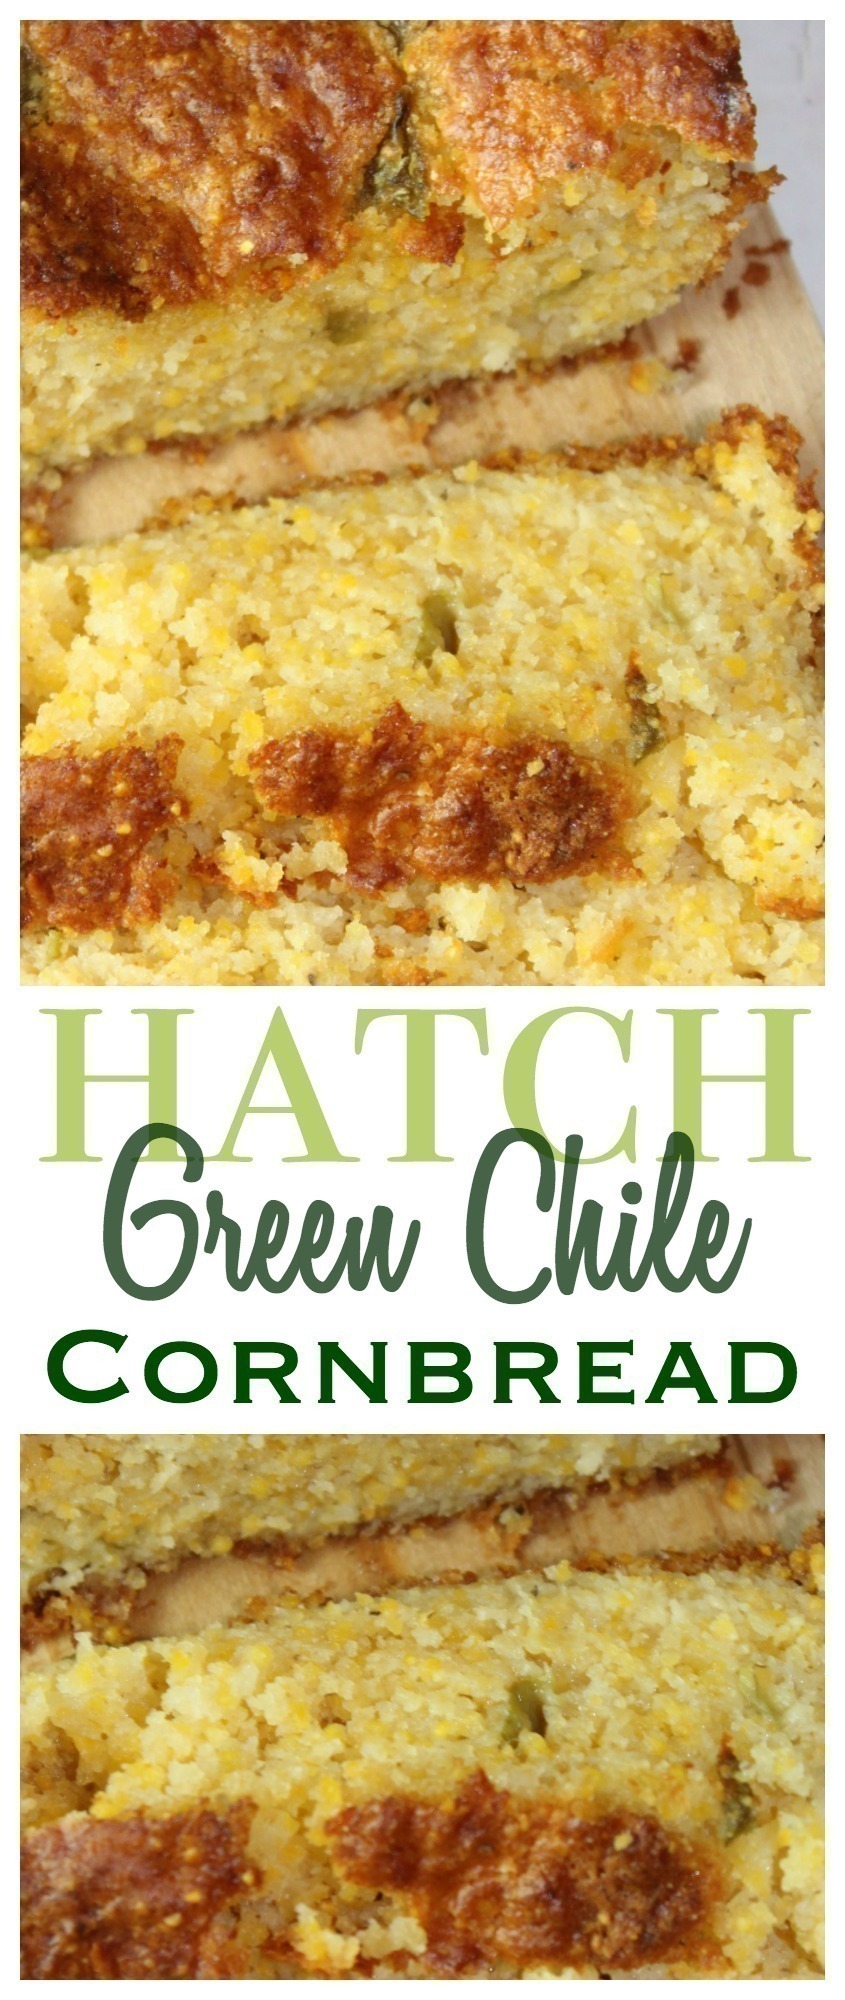 Combine fresh Hatch green chiles and cheese to make this moist, cheesy hatch green chile cornbread with a little kick! Perfect to serve with your next bowl of chili or eat as is!